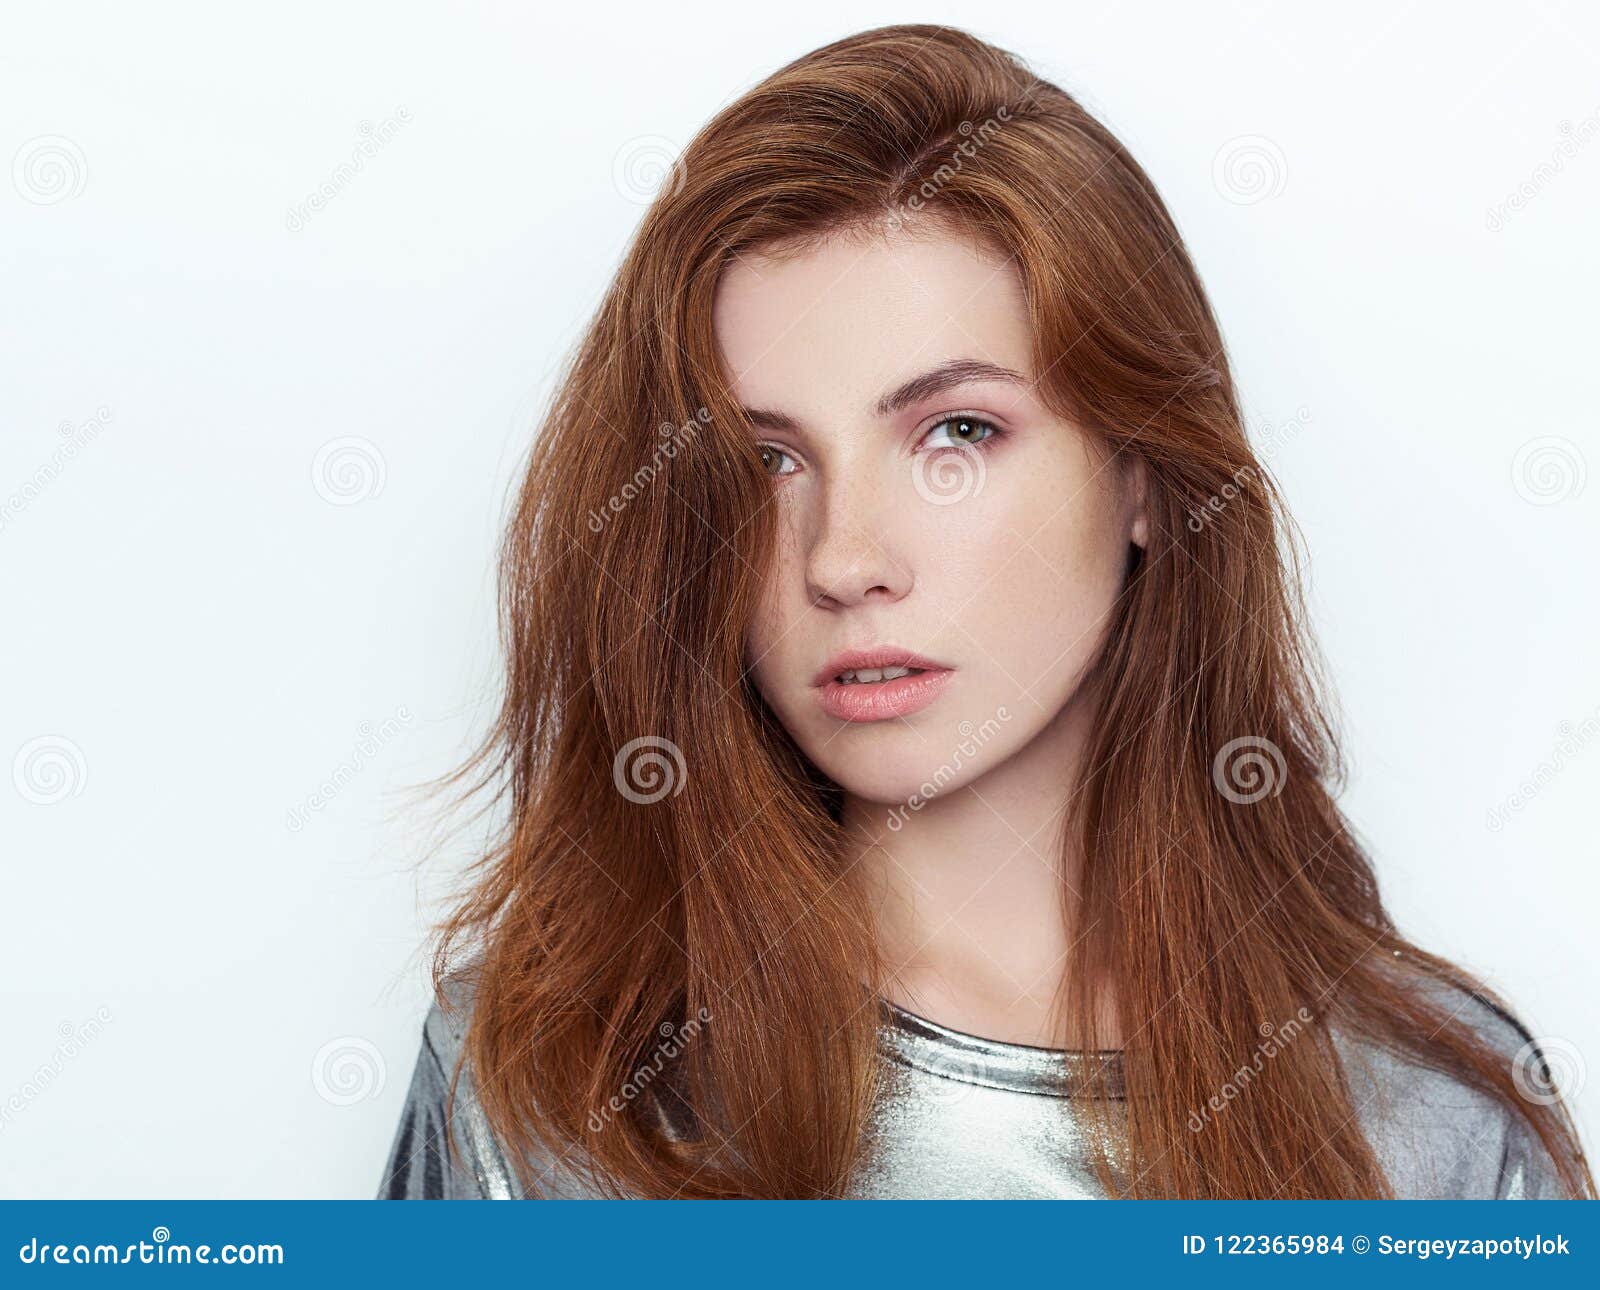 Young Beautiful Excited Woman With Gorgeous Natural Red Hair Green Eyes ...